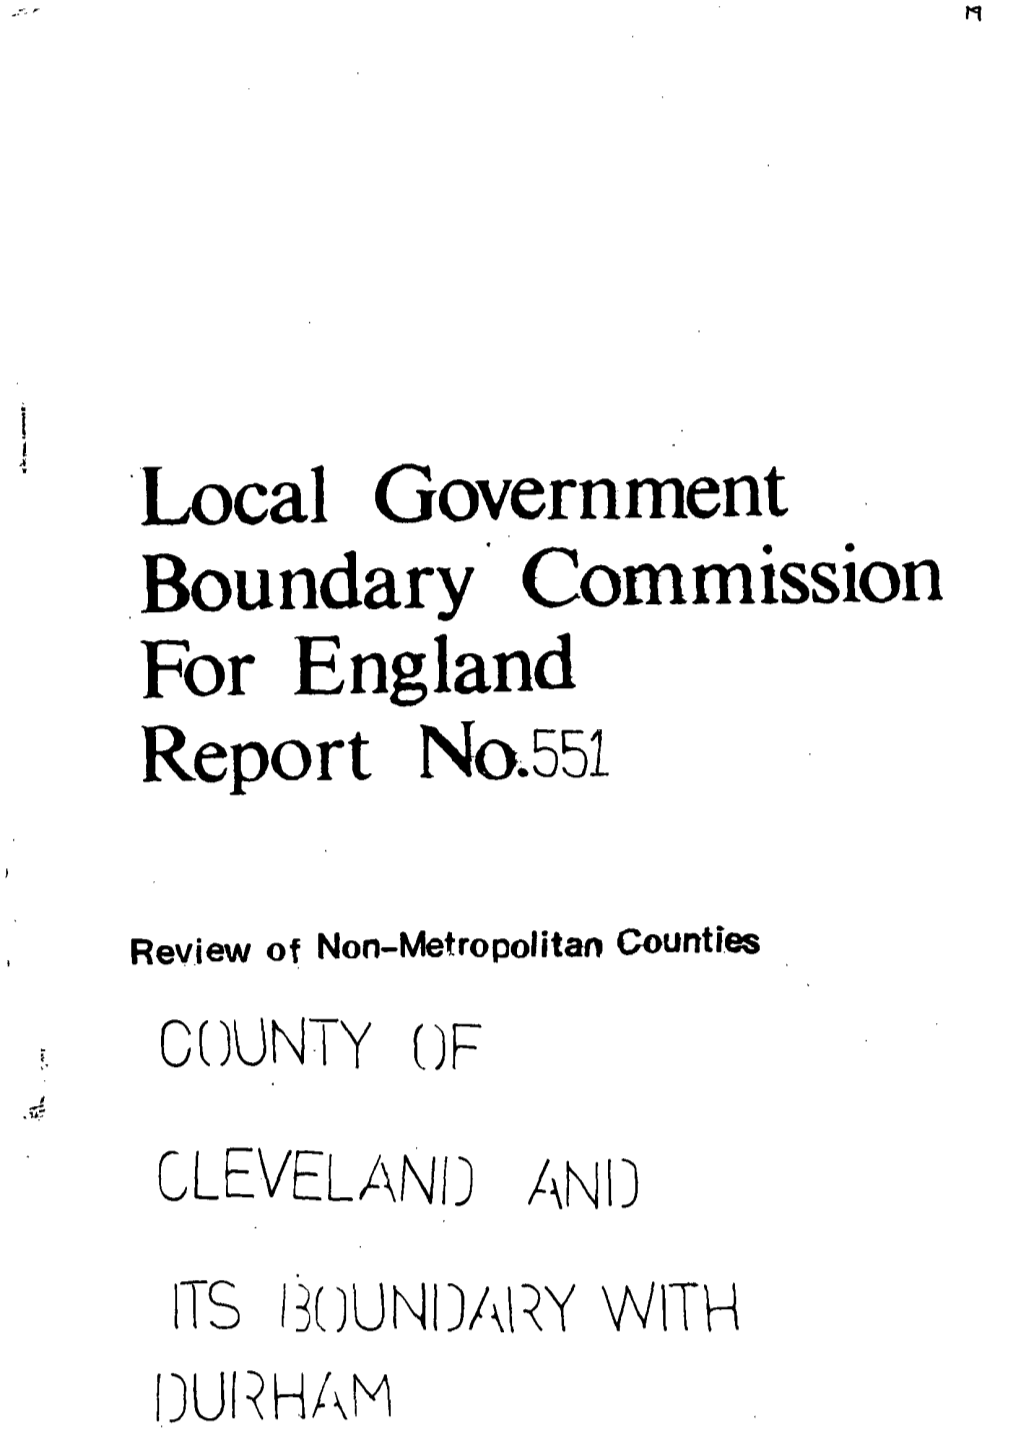 Local Government Boundary Commission for England Report No.551